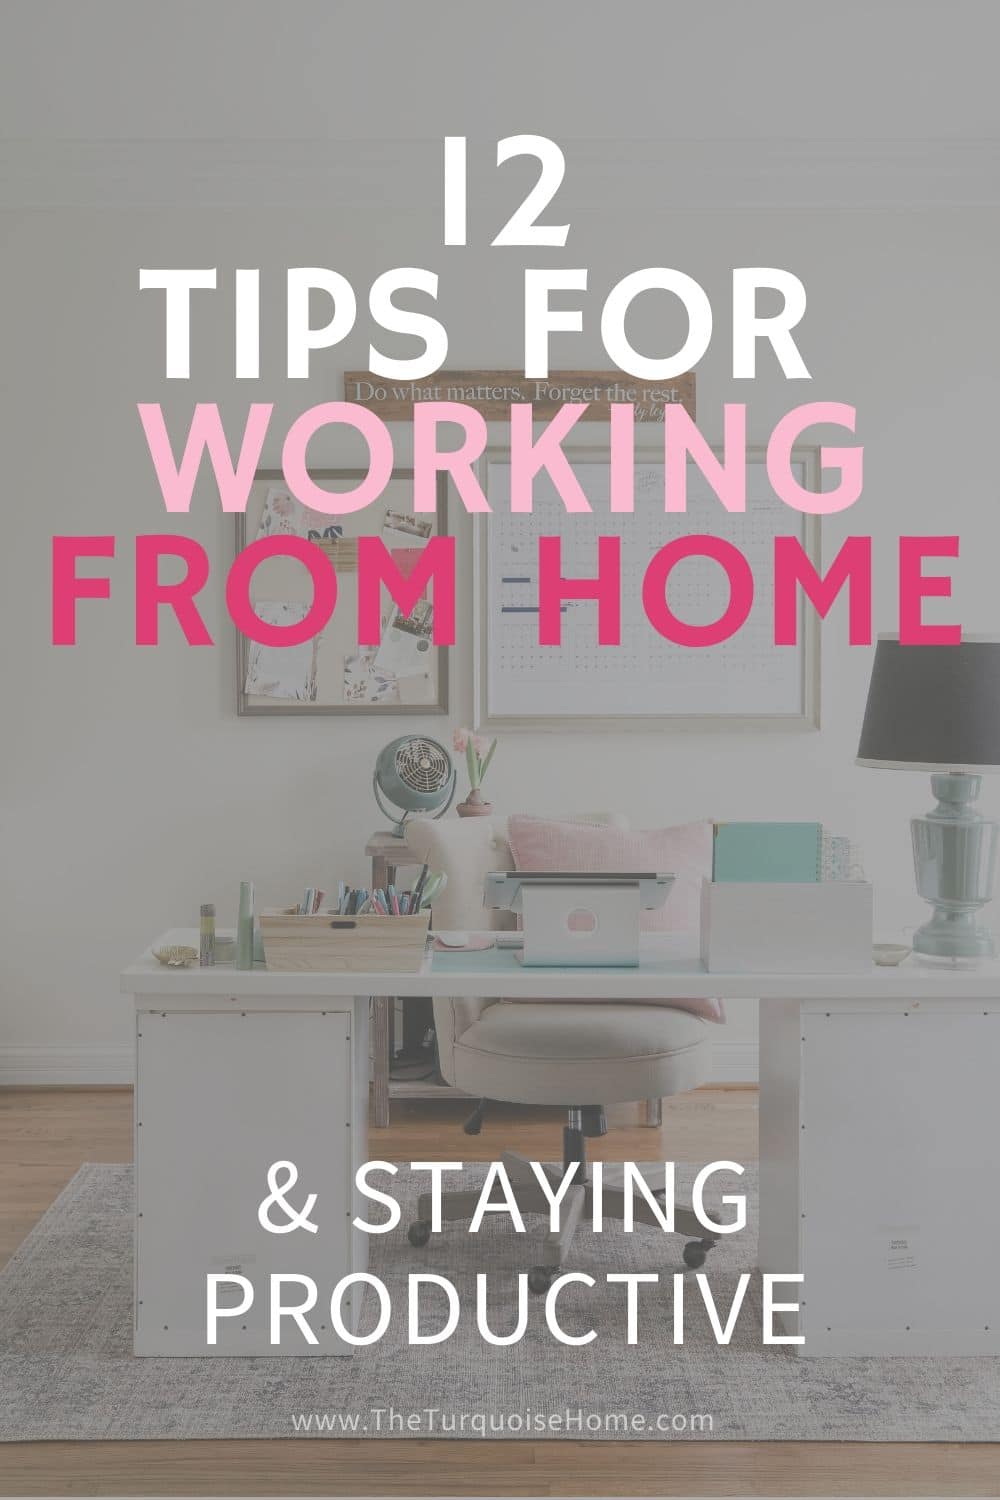 Tips for Working from Home (& Staying Productive)